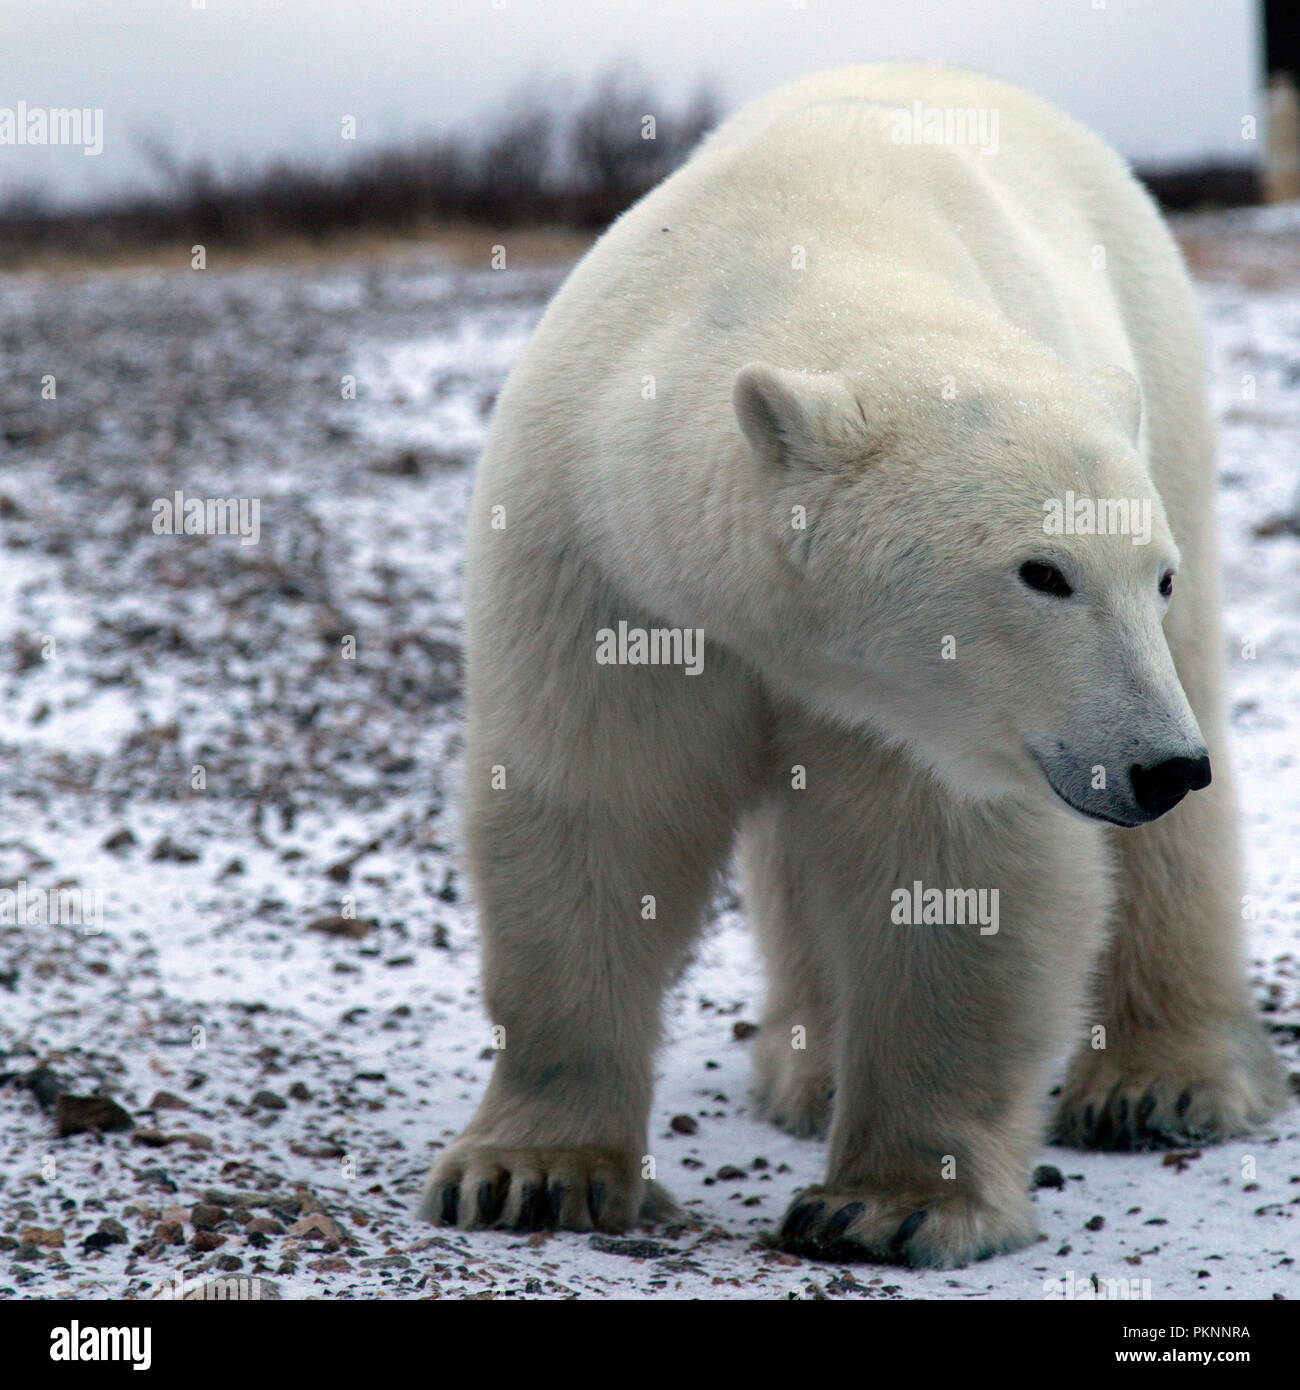 A polar bear (Ursus maritimus) on snowy ground by the Hudson Bay in Manitoba, Canada. Bears wait by the shoreline ahead of the ice freezing. Stock Photo